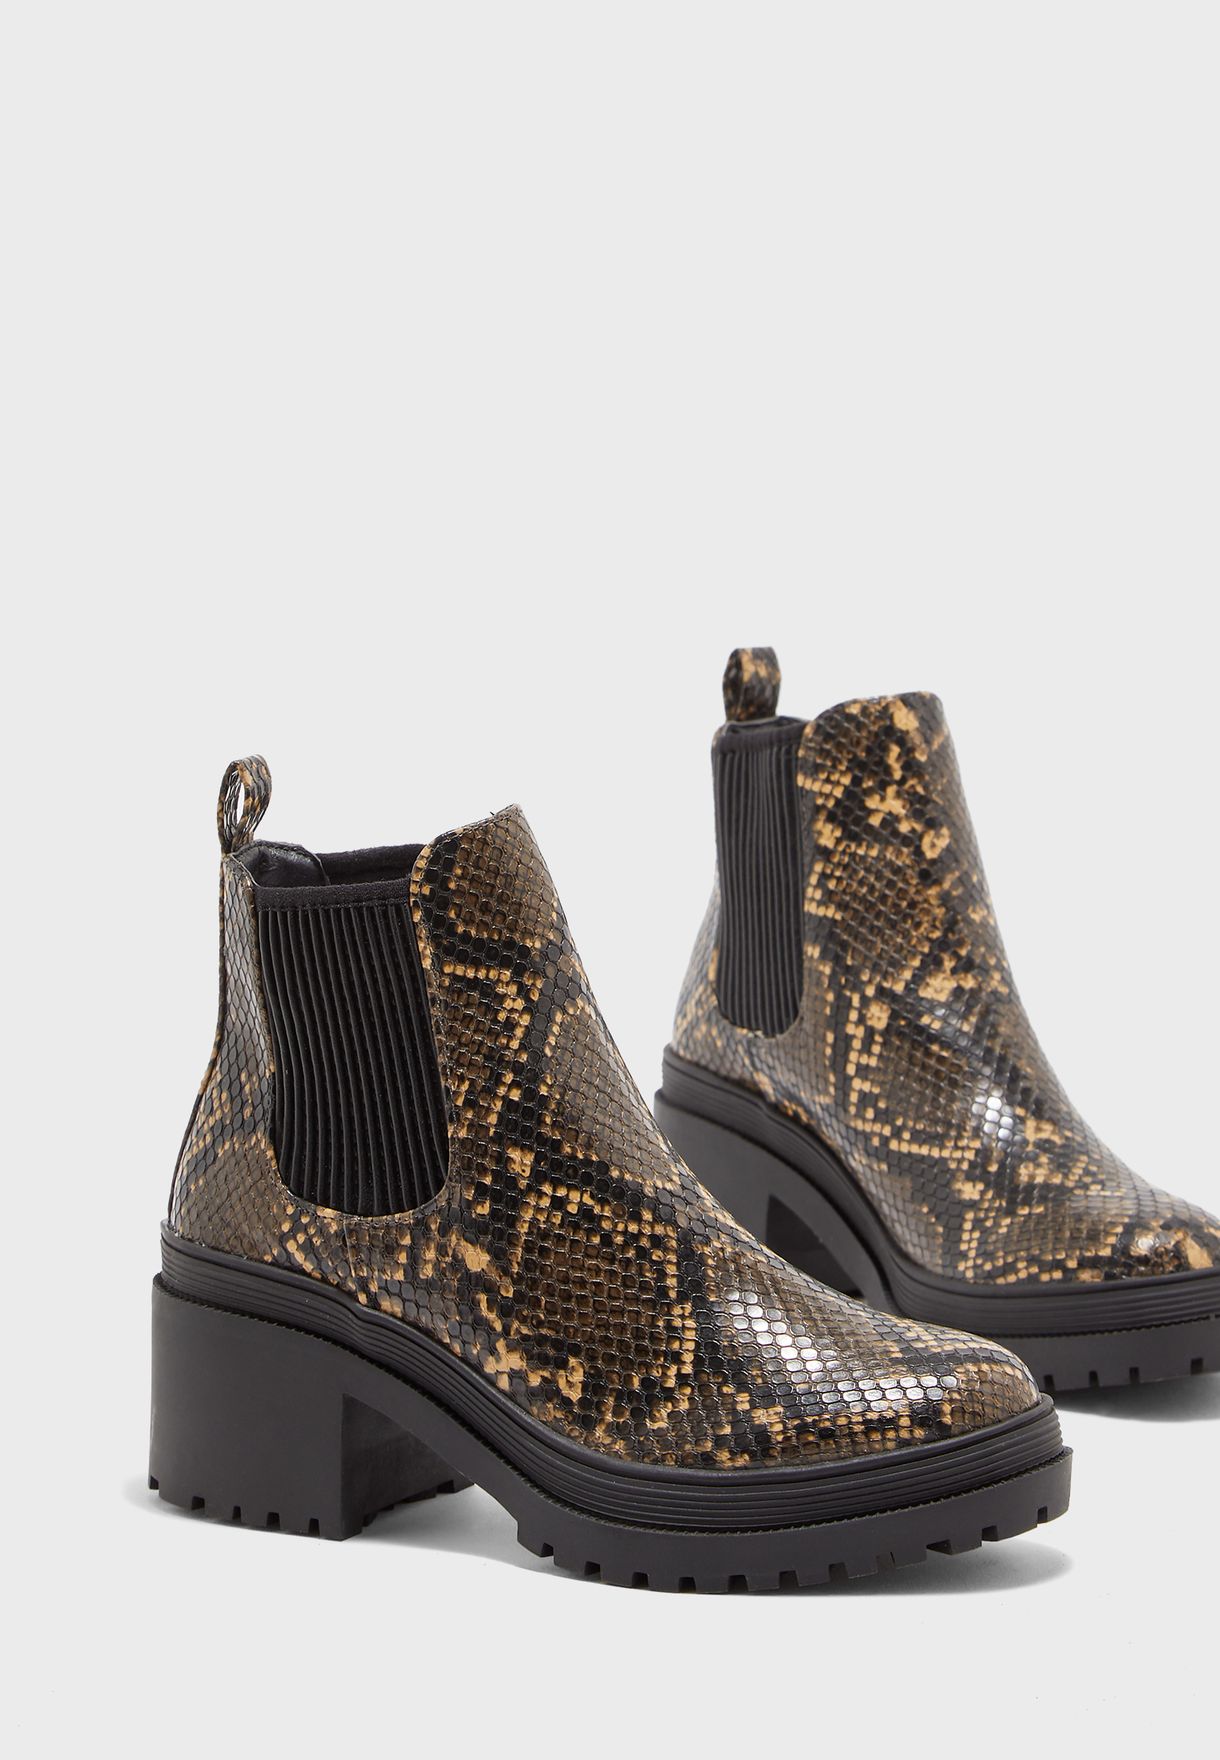 Topshop snakeskin Brixton Ankle Boot 